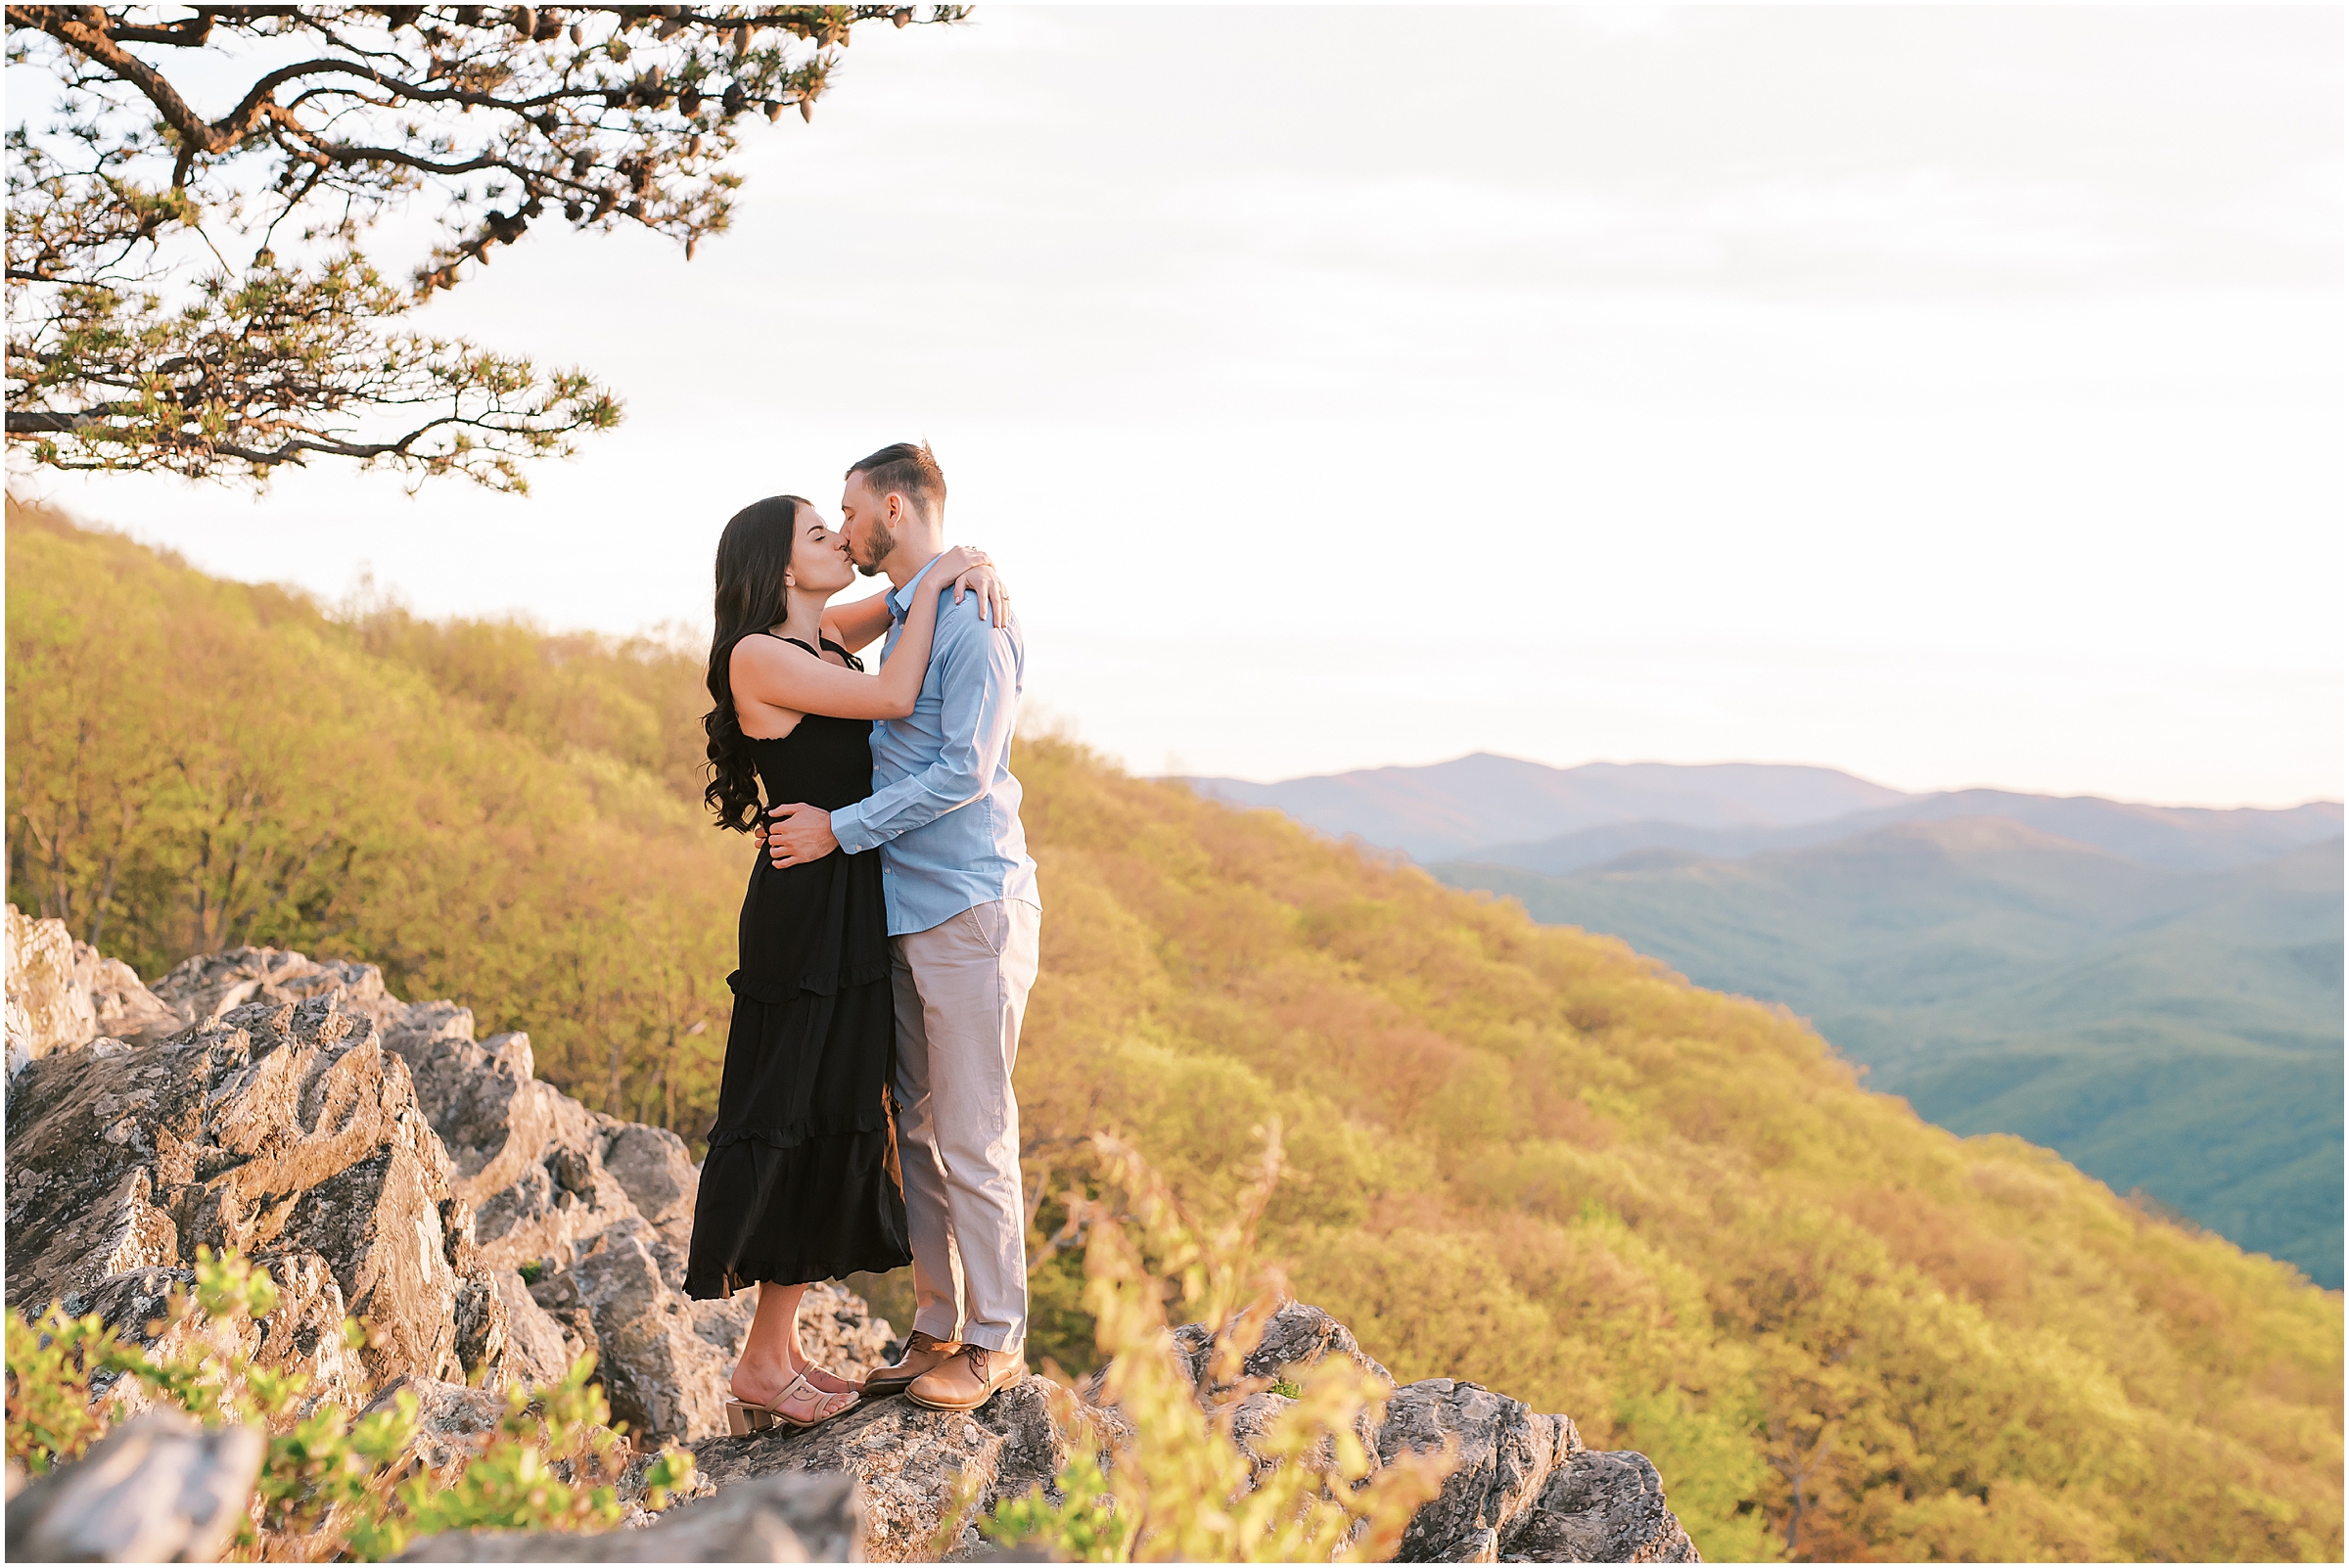 Couple kissing during Ravens Roost Overlook Engagement Session